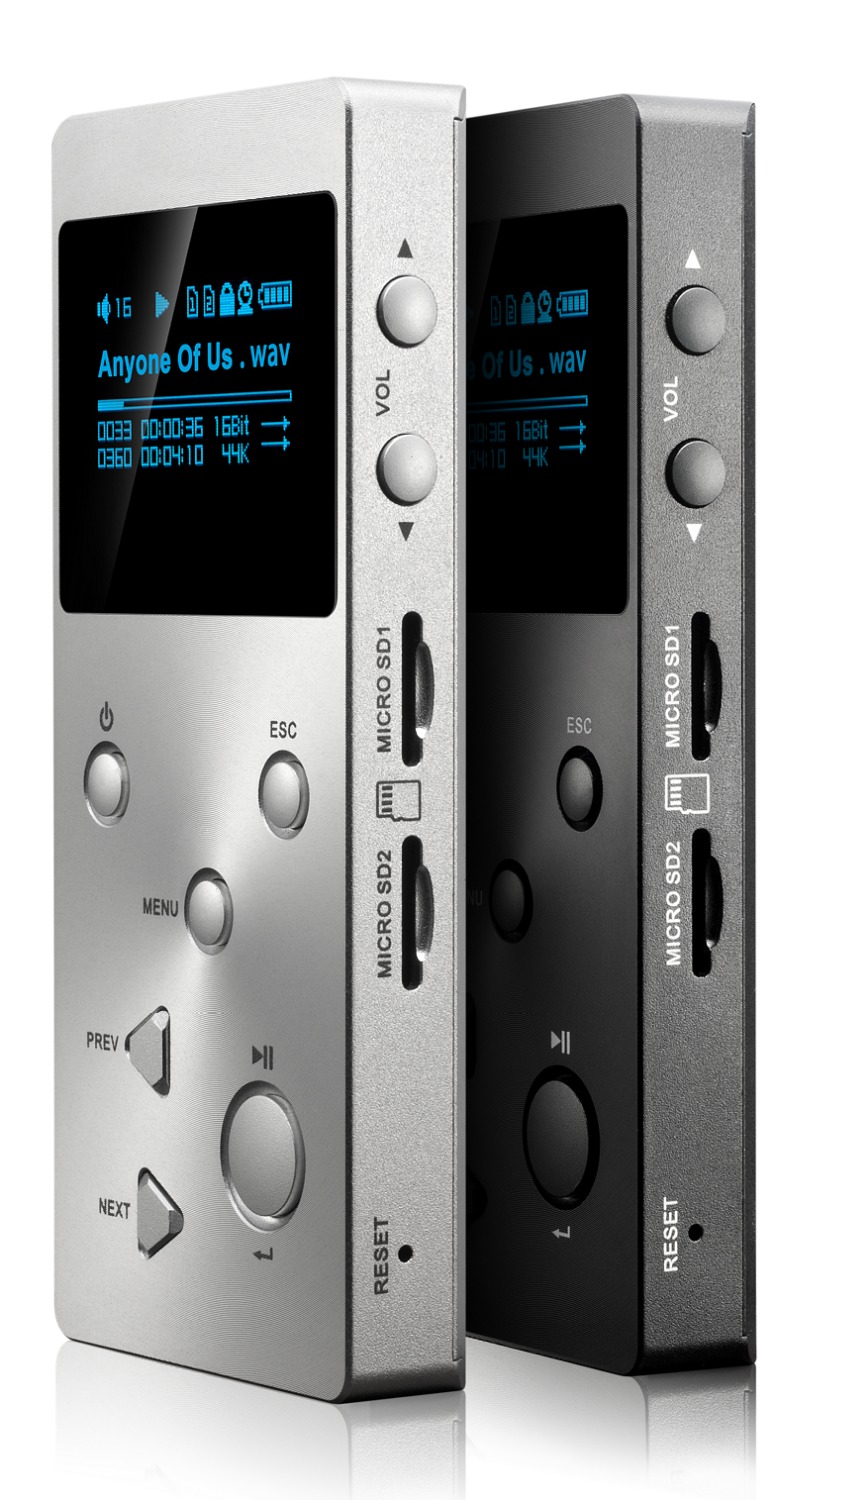 XDUOO X3 Professional Lossless Music MP3 HIFI Music Player With HD OLED Screen Support APE/FLAC/ALAC/WAV/WMA/OGG/MP3 -2015 NEW